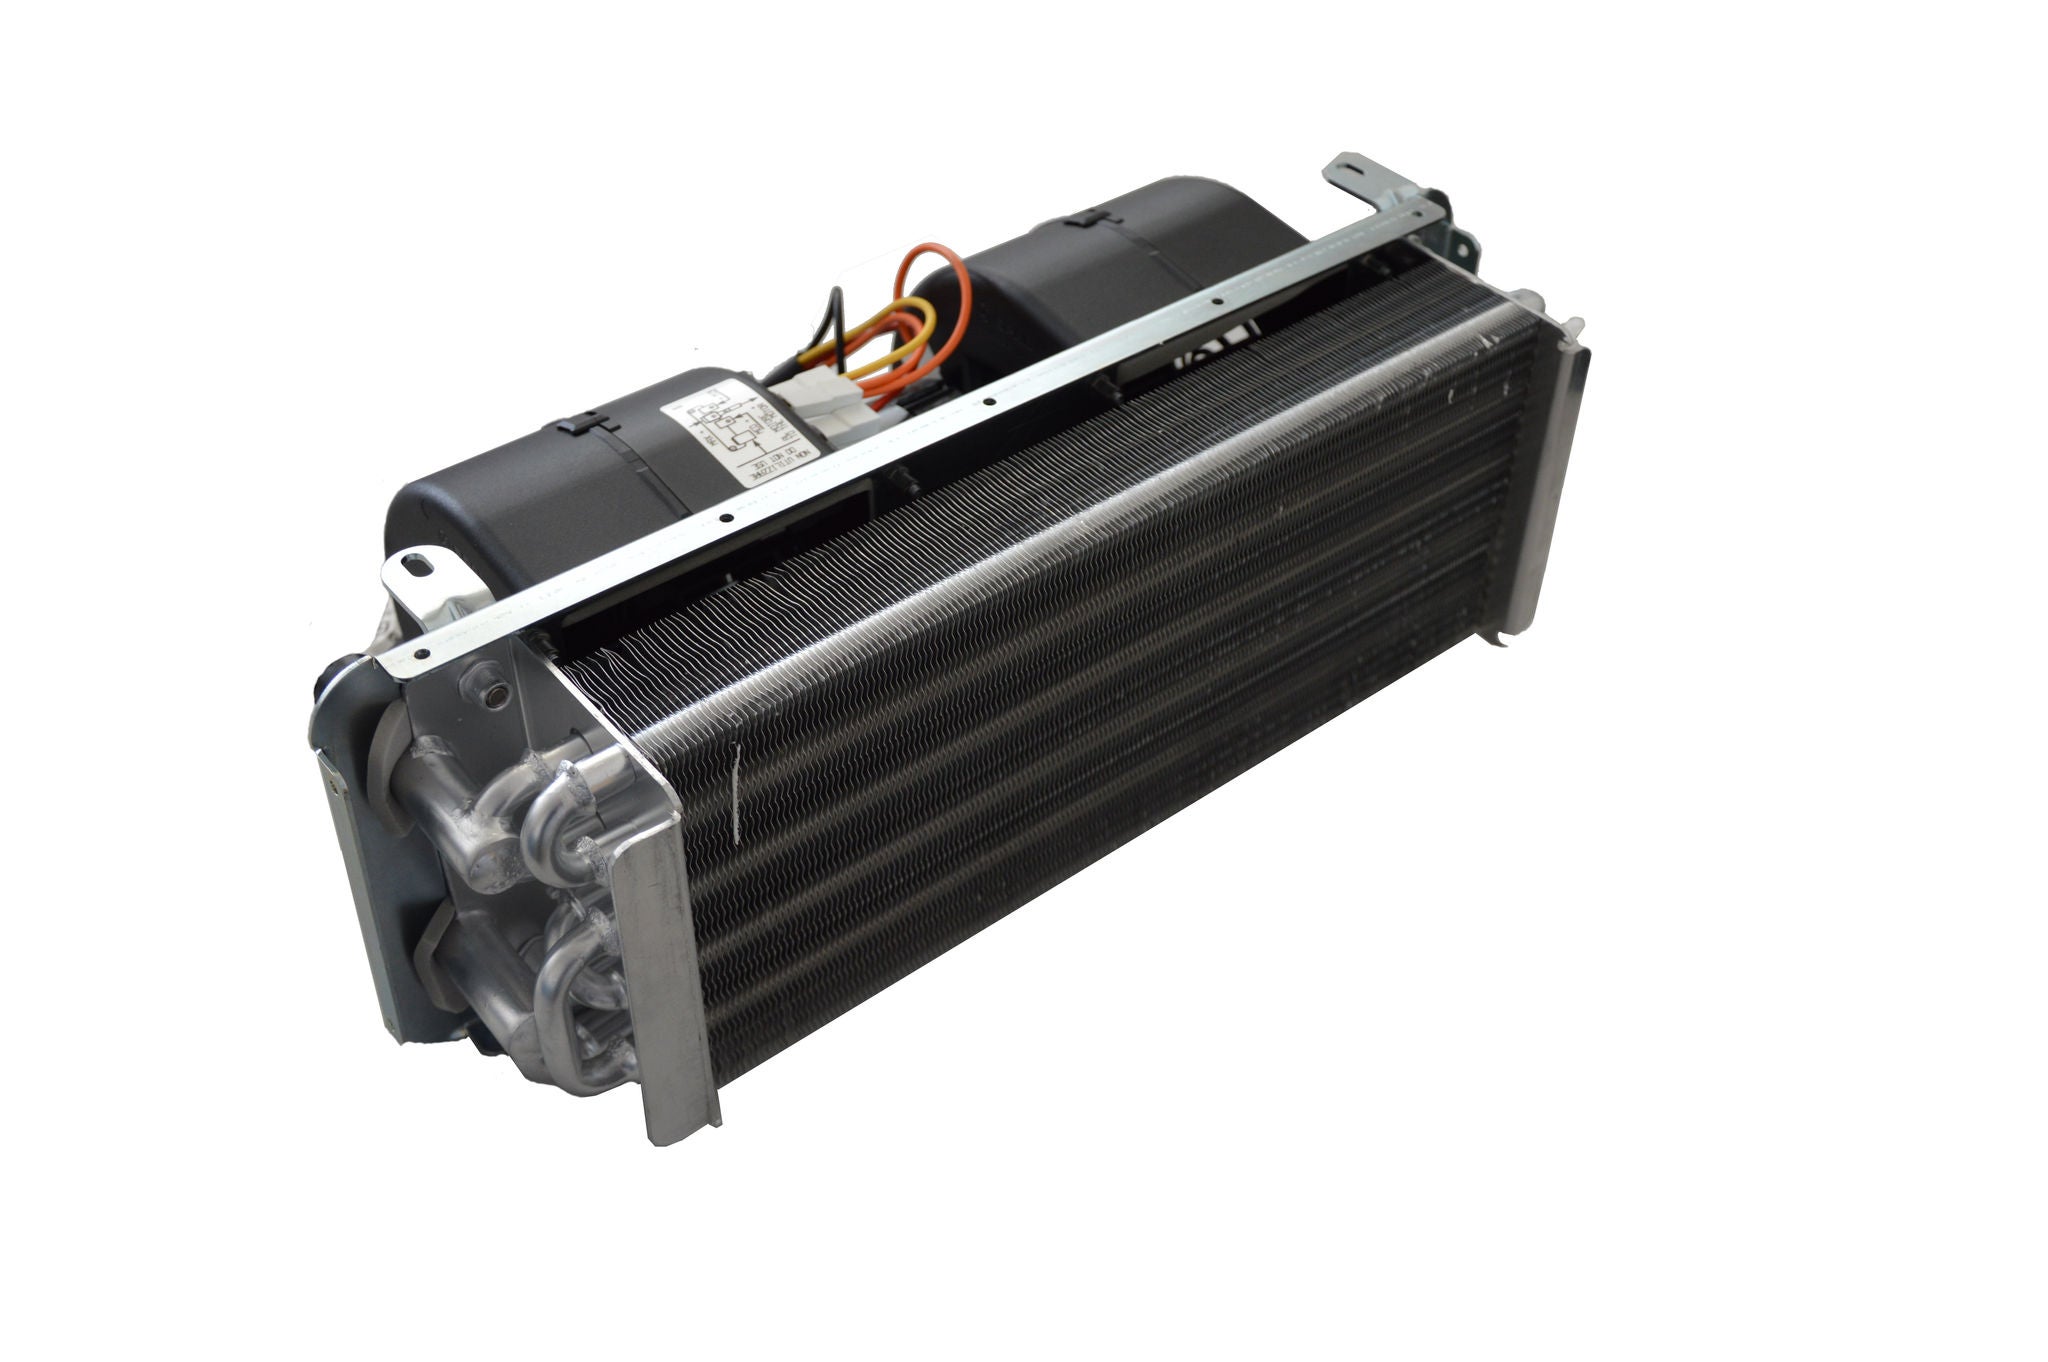 Product picture of heat exchanger model HTX M HD